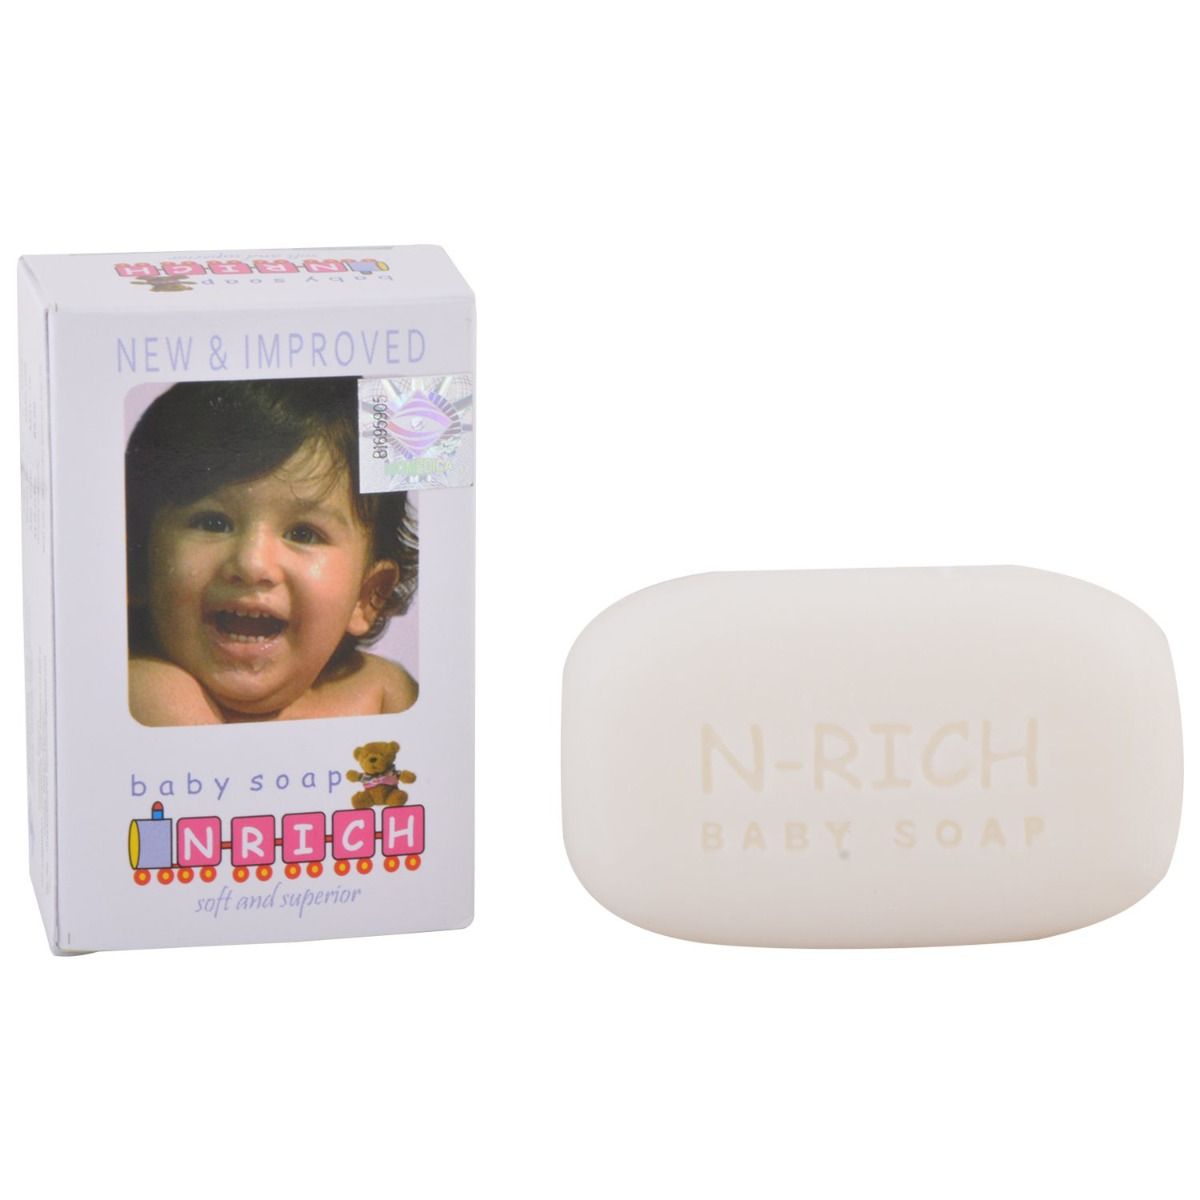 N-Rich Soap, 75 gm, Pack of 1 